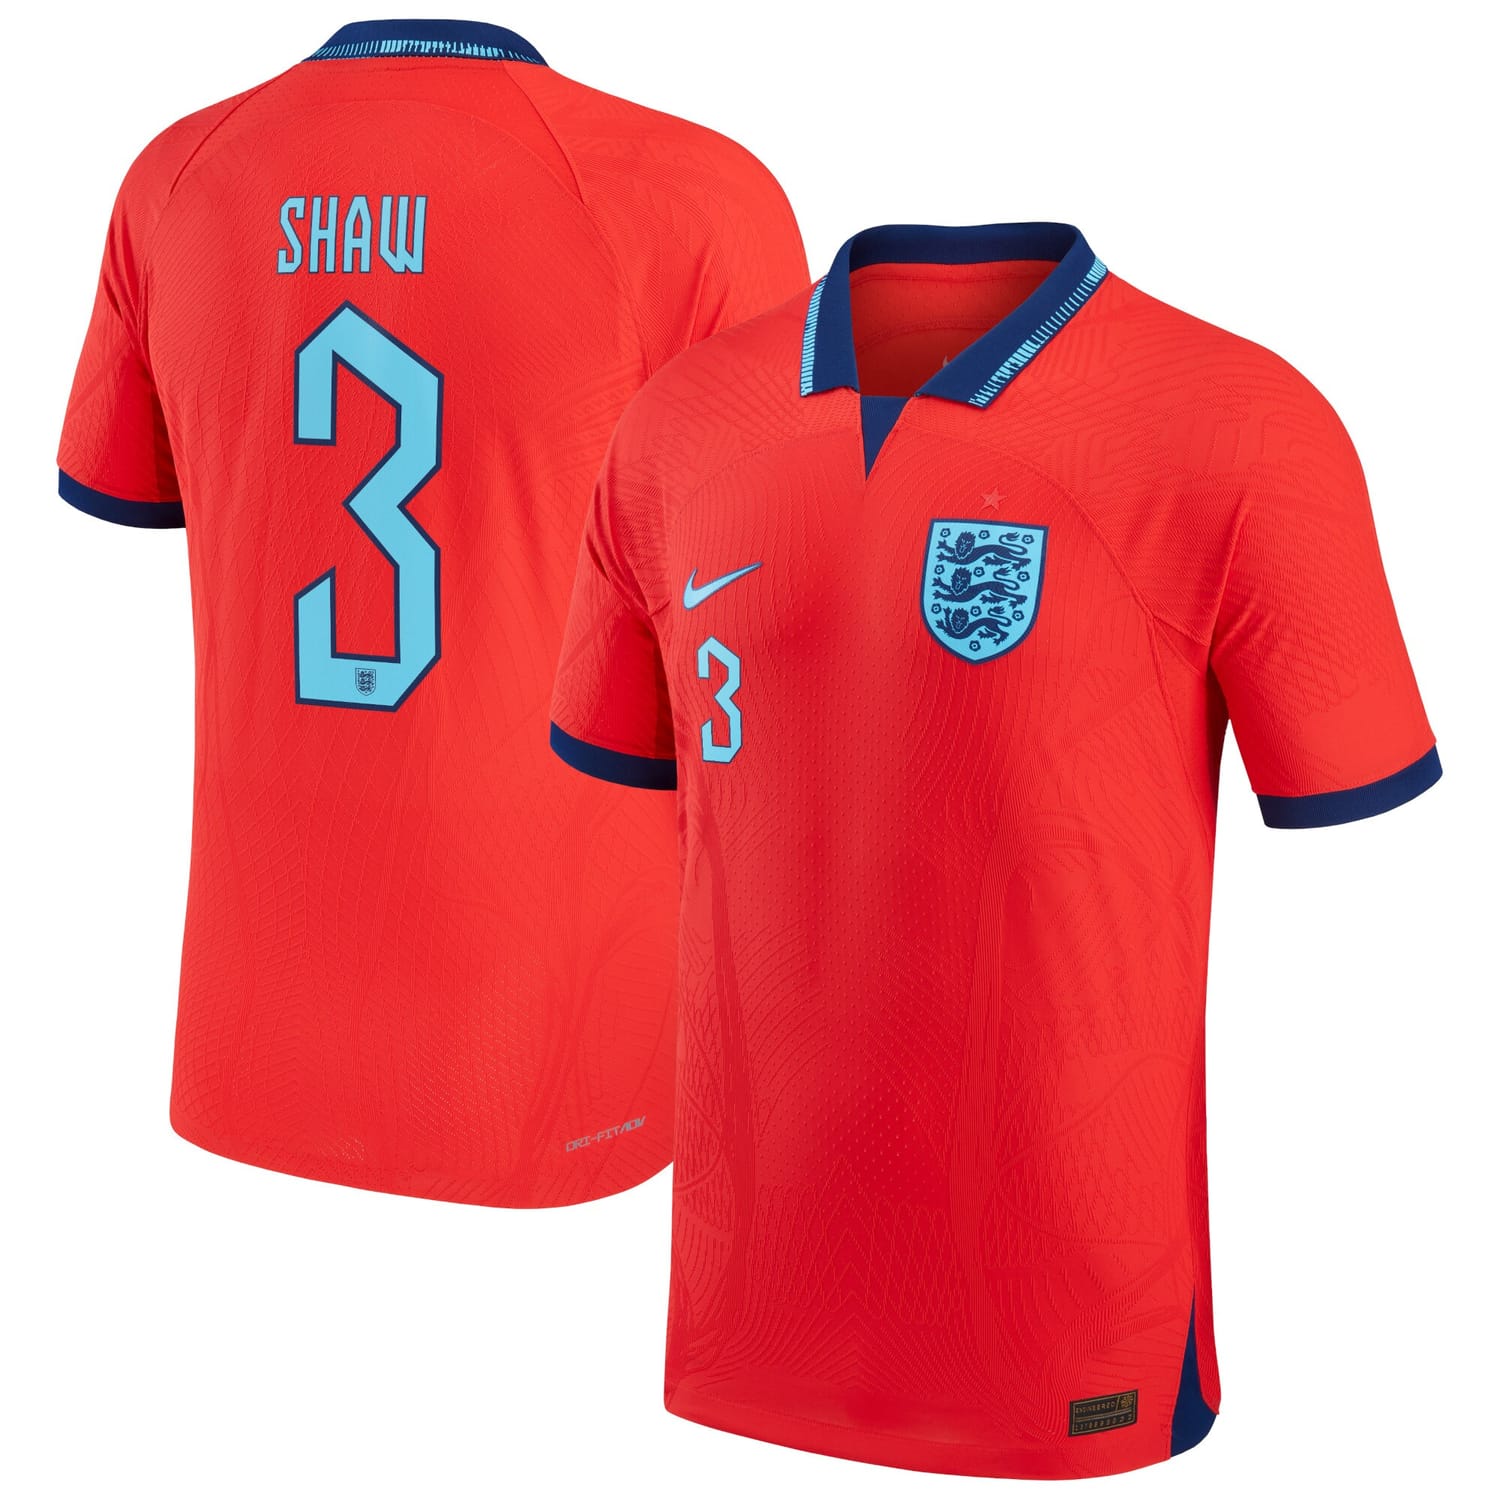 England National Team Away Authentic Jersey Shirt 2022 player Luke Shaw 3 printing for Men